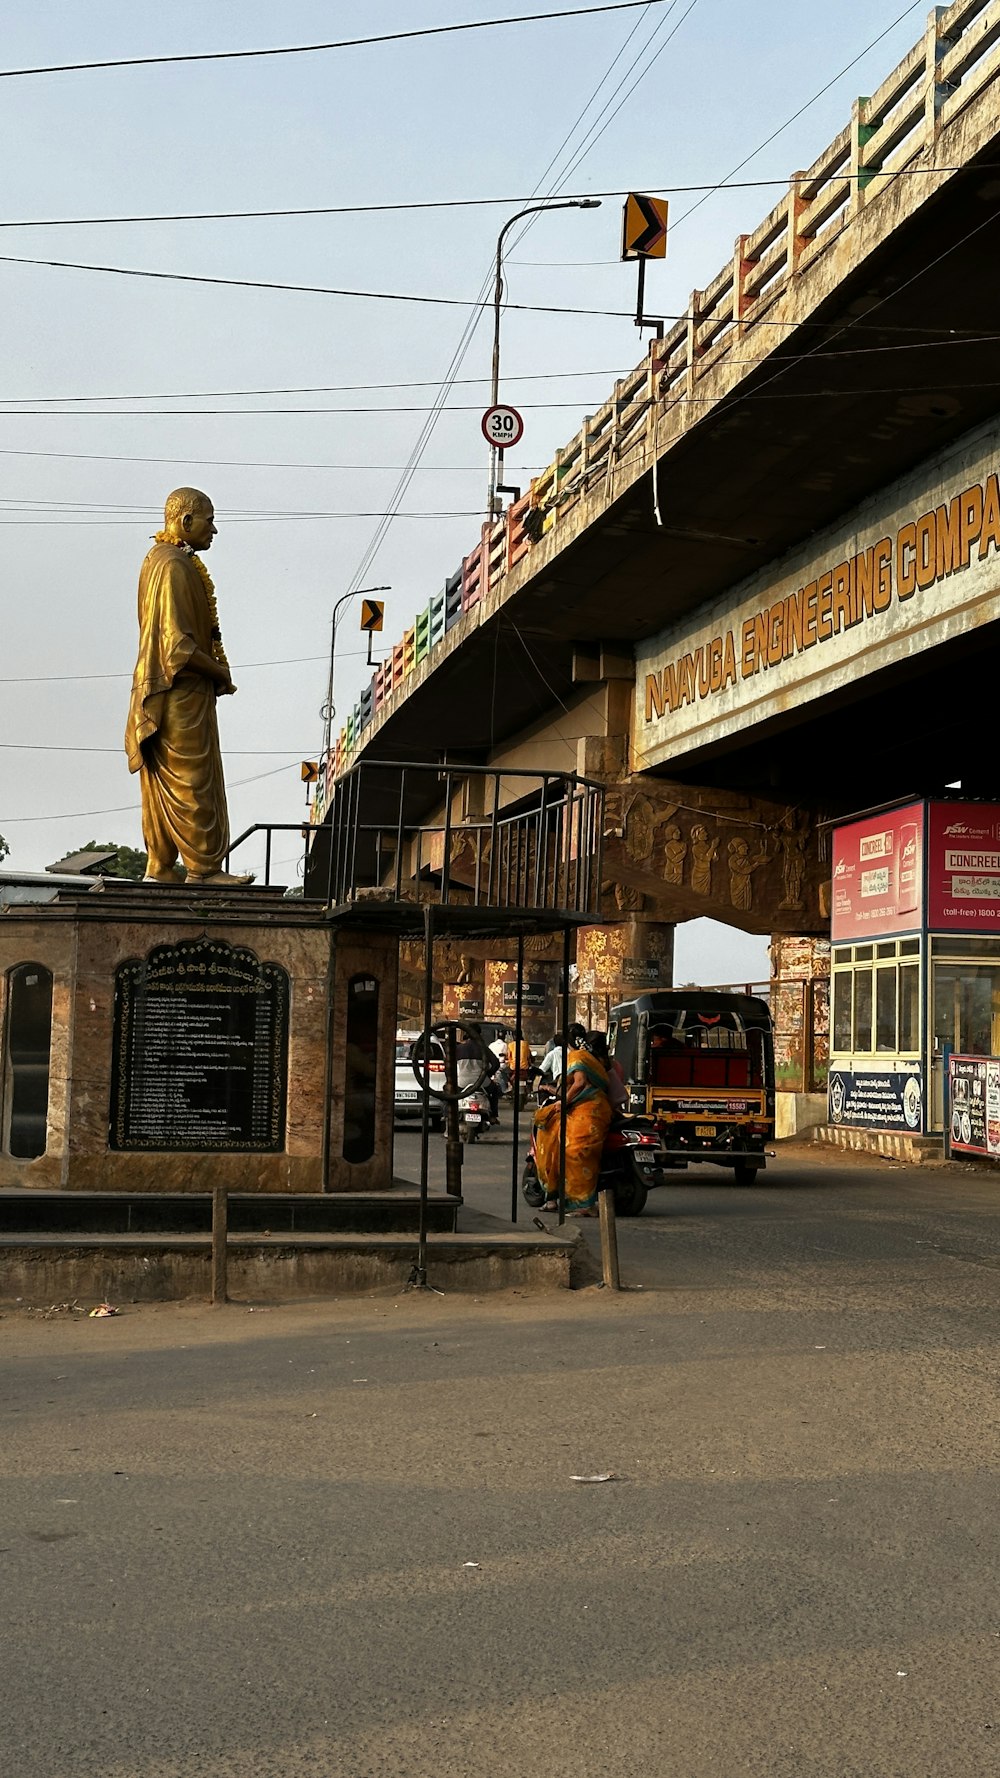 a statue of a man standing on top of a bridge